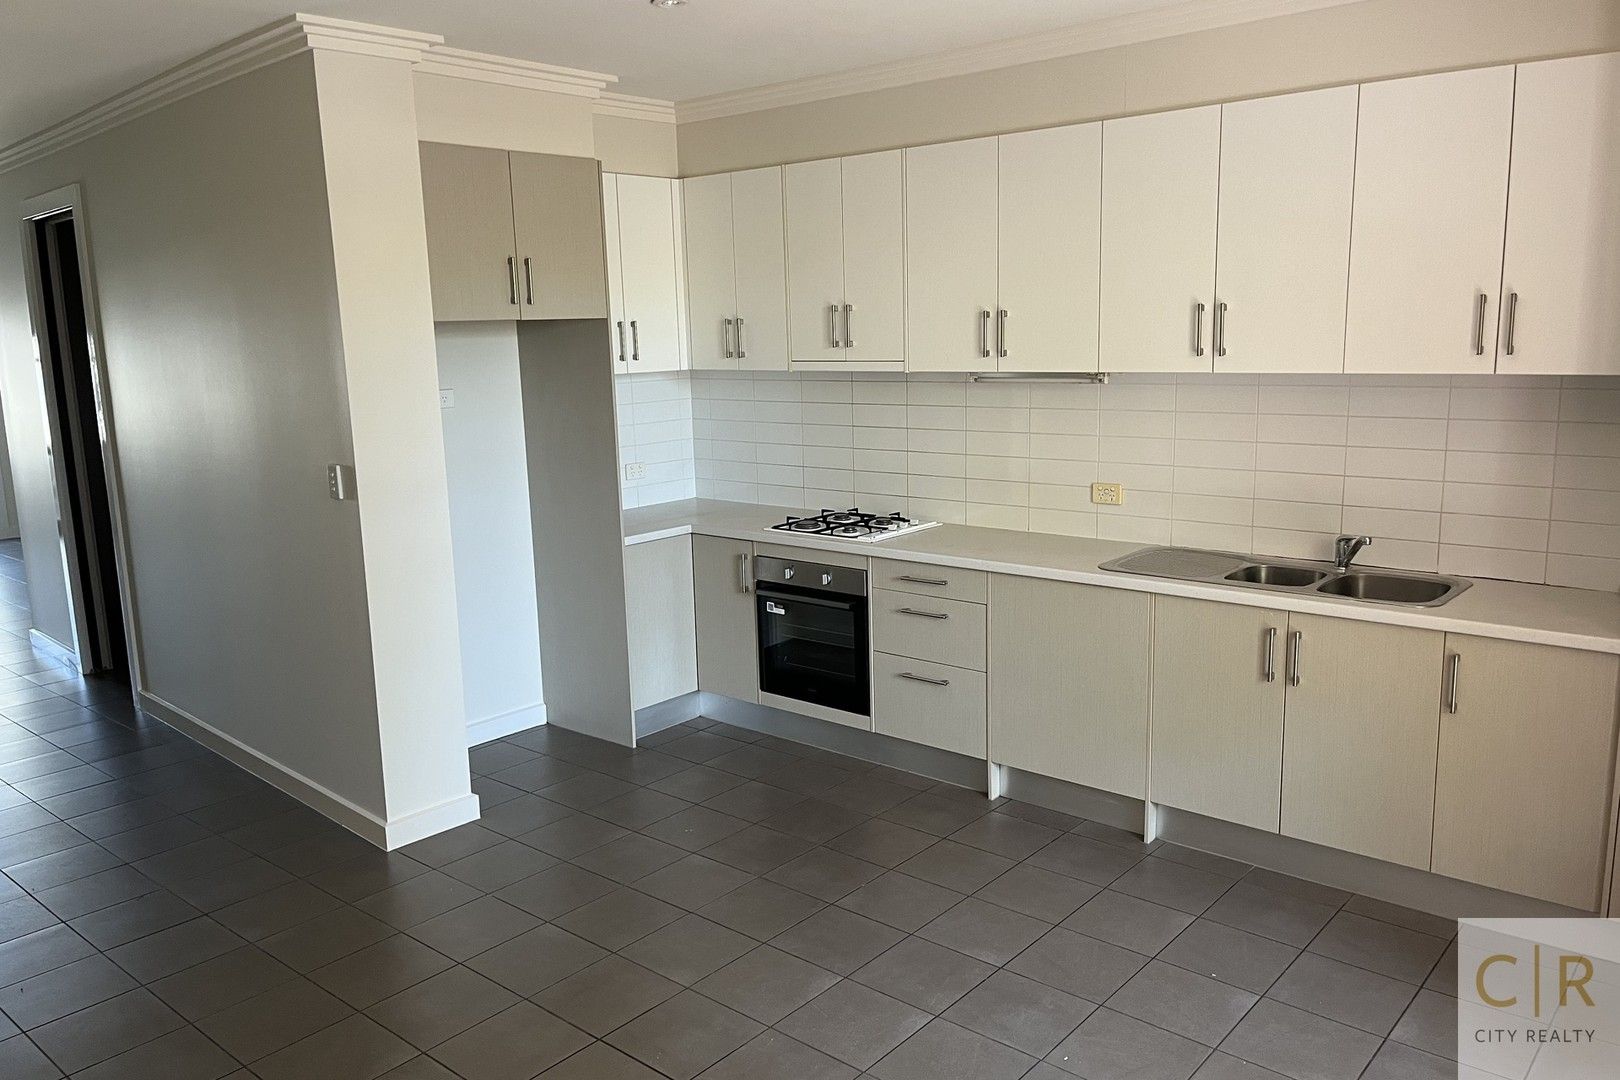 2 bedrooms Townhouse in 3B Montacute Road CAMPBELLTOWN SA, 5074